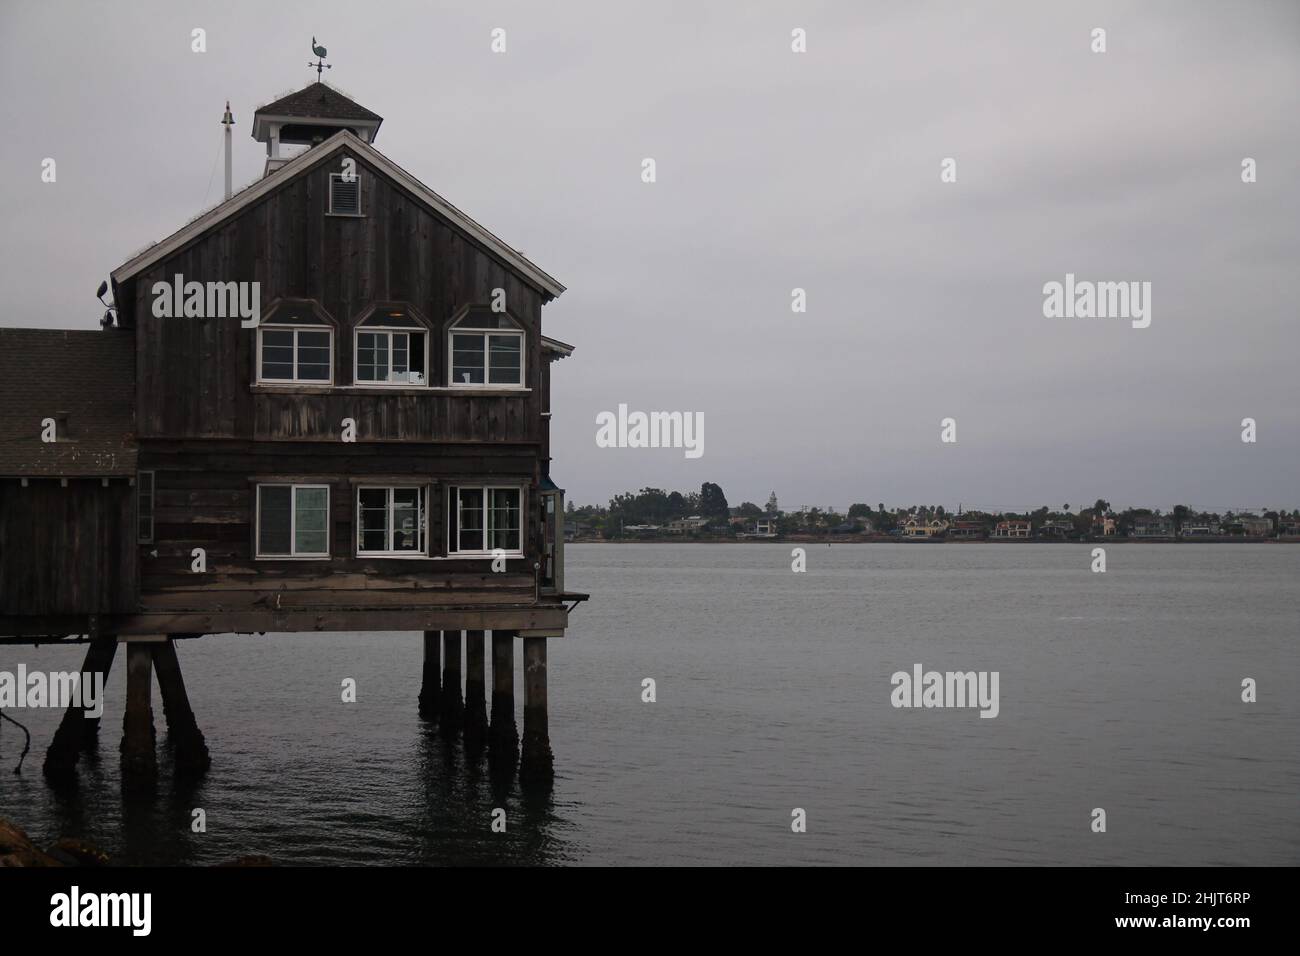 The house floating on the palisade over the Ocean in California Stock Photo